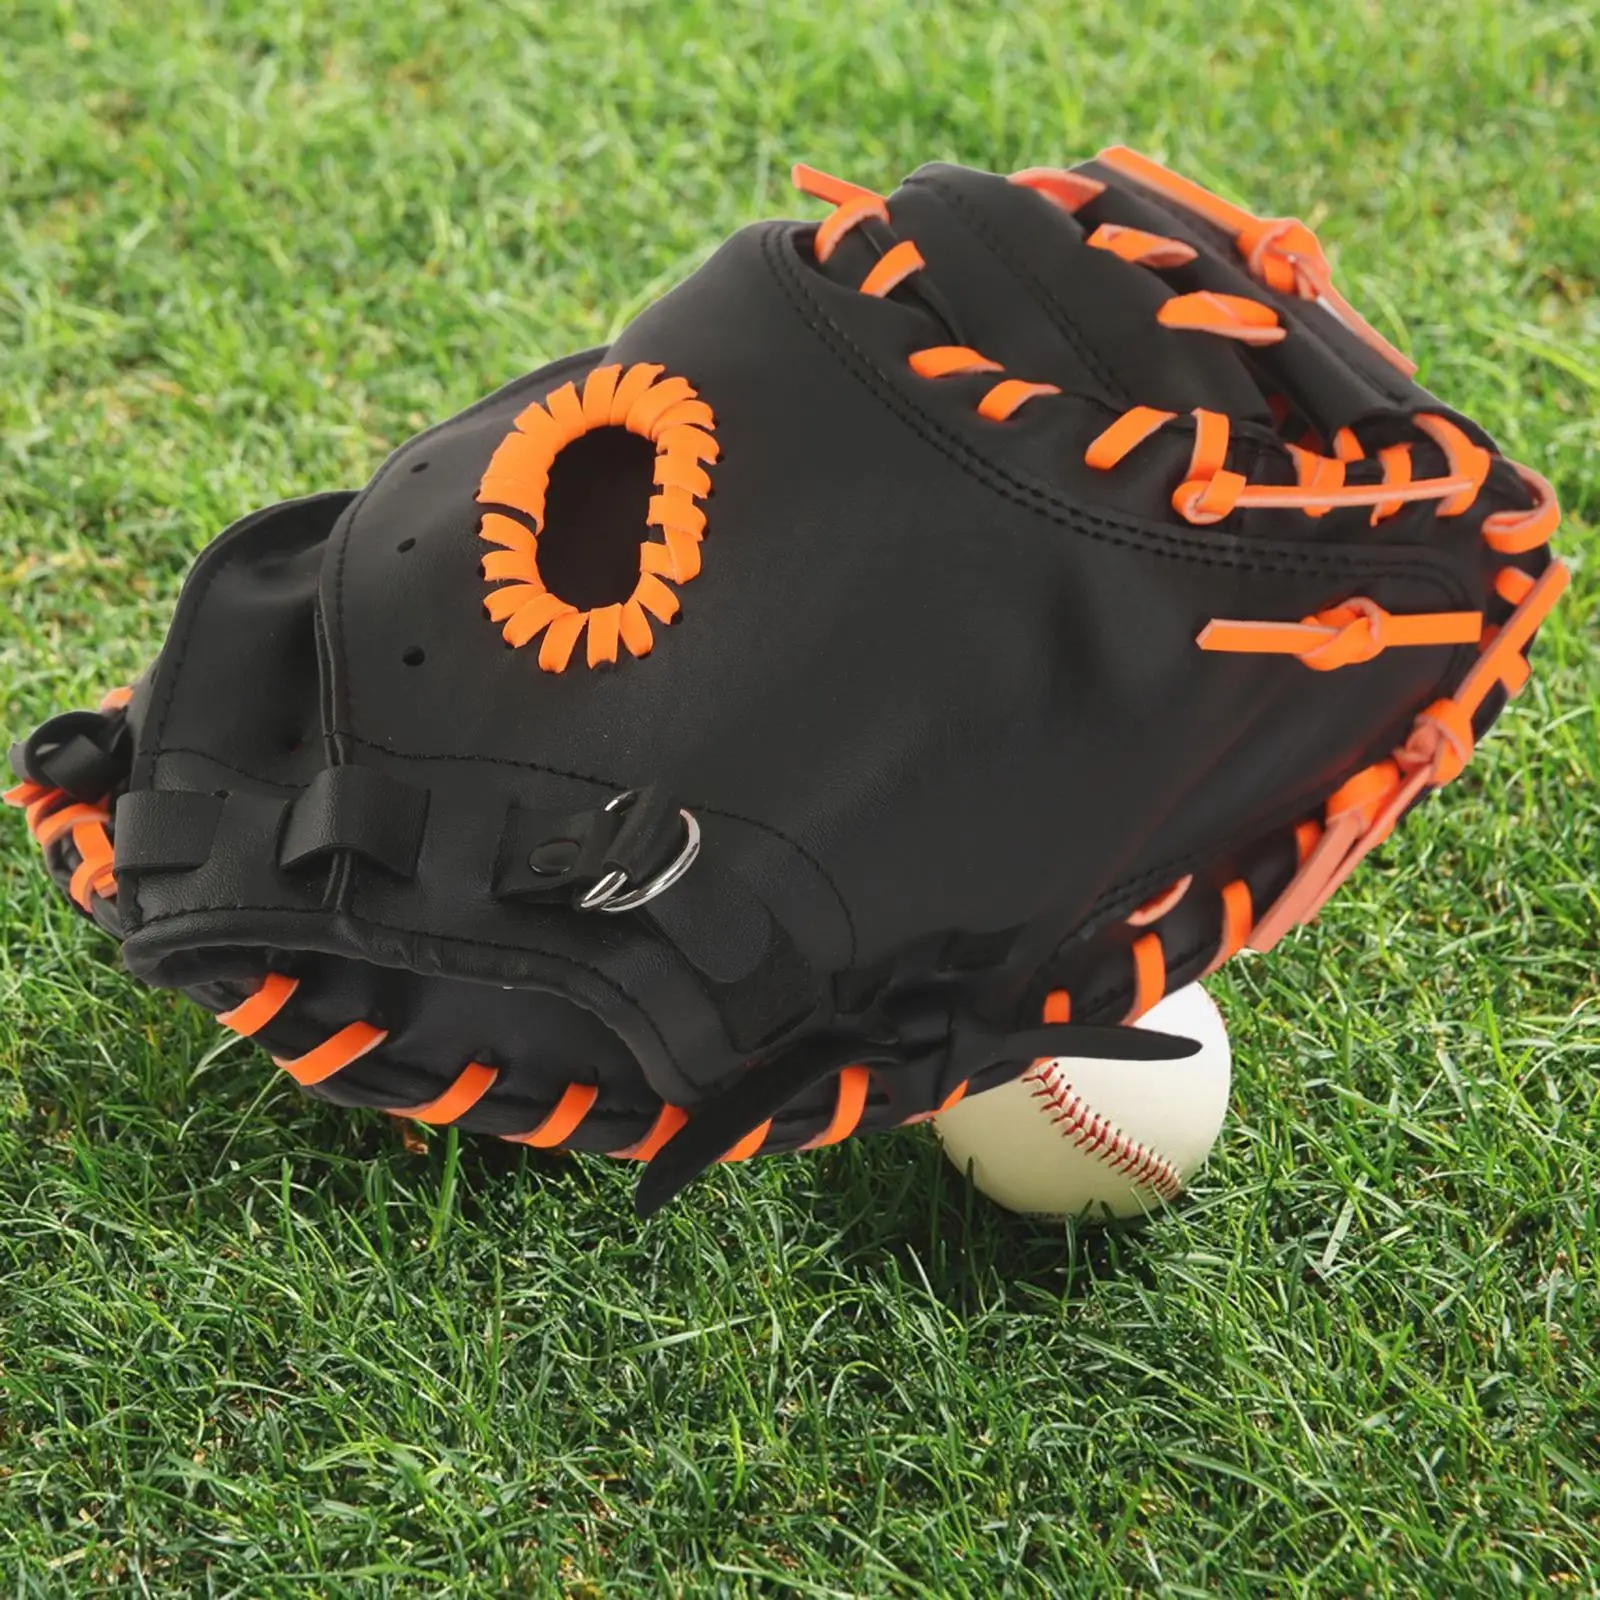 Sports Baseball Gloves Premium Catcher Mitt for Youth Adult Match Practice